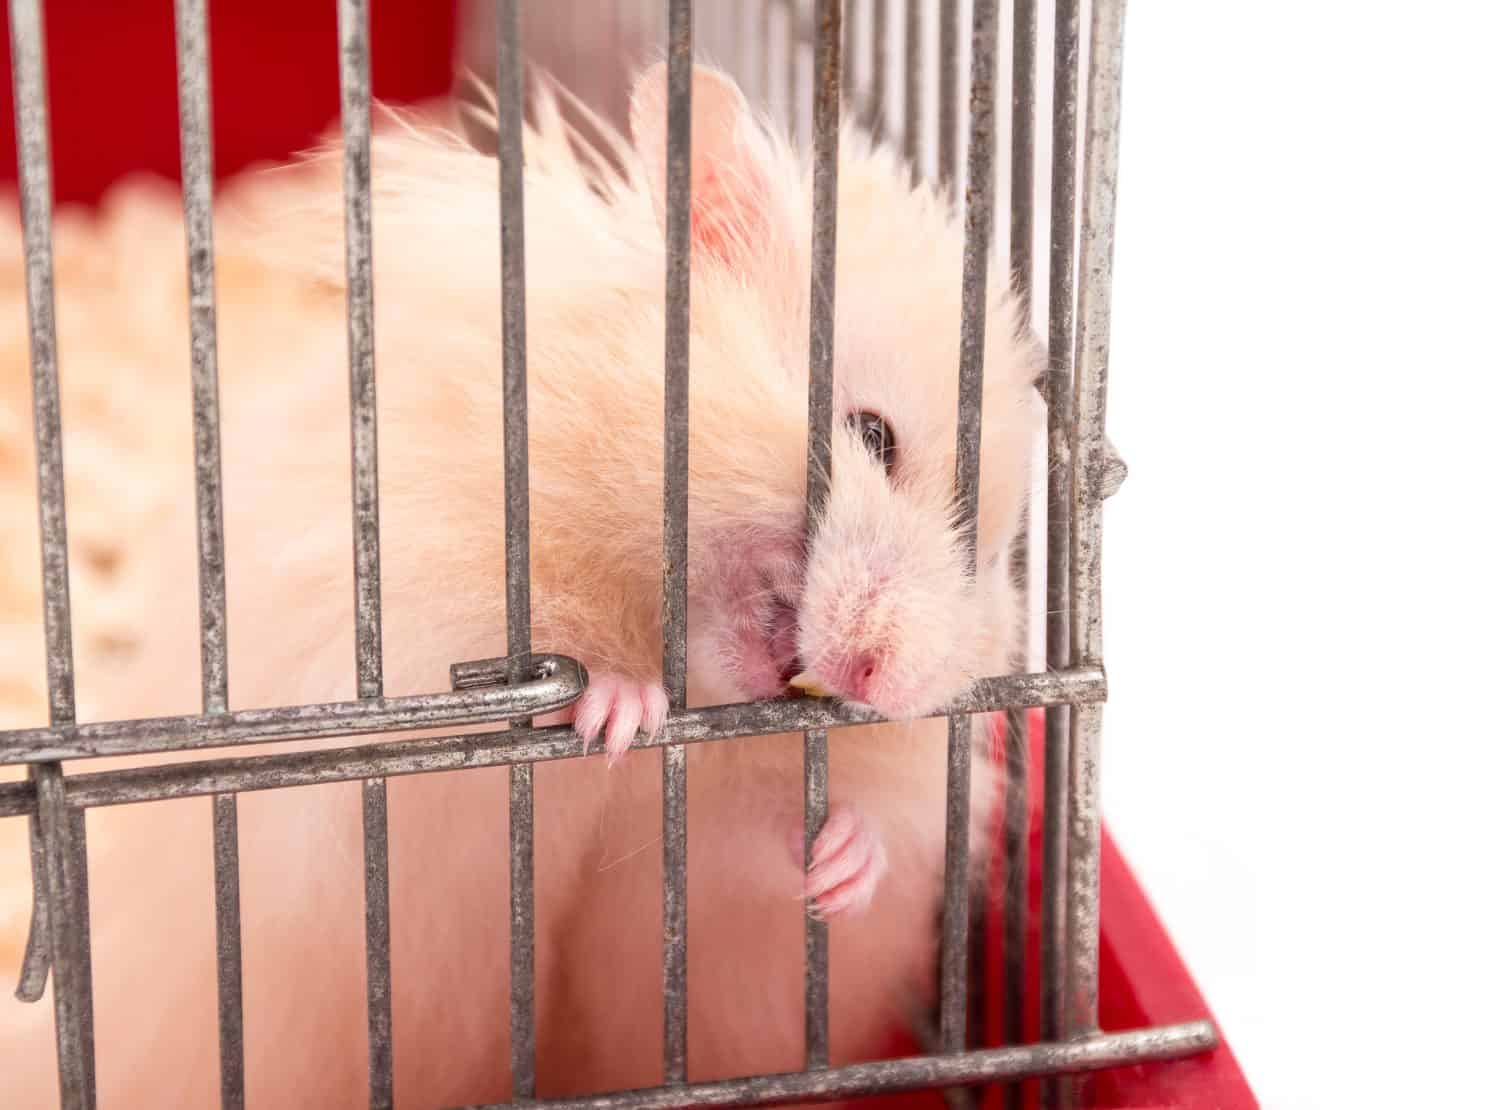 Fierce Syrian hamster gnawing on its cage bars (selective focus on the hamster teeth and paws) isolated on white, copy space on the right